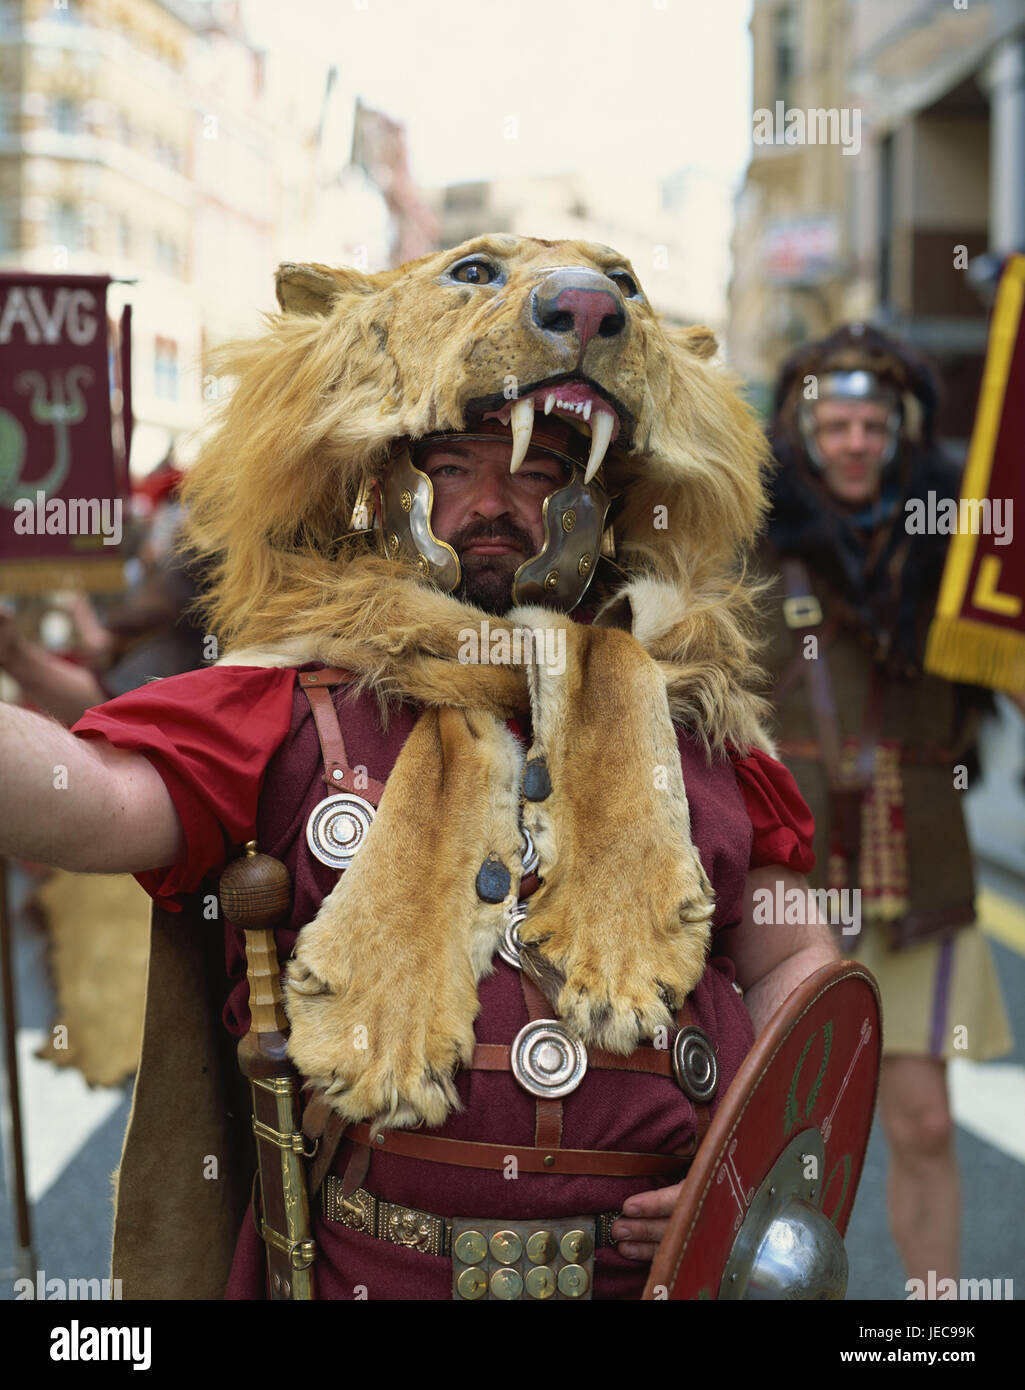 Great Britain, England, Northumbria, Houesteads, men, costumes, legionaries, Roman, lion's head, no model release, Europe, places of interest, people, culture, story, historically, tradition, soldier, foetus-giving, horrific, lion's fur, Stock Photo